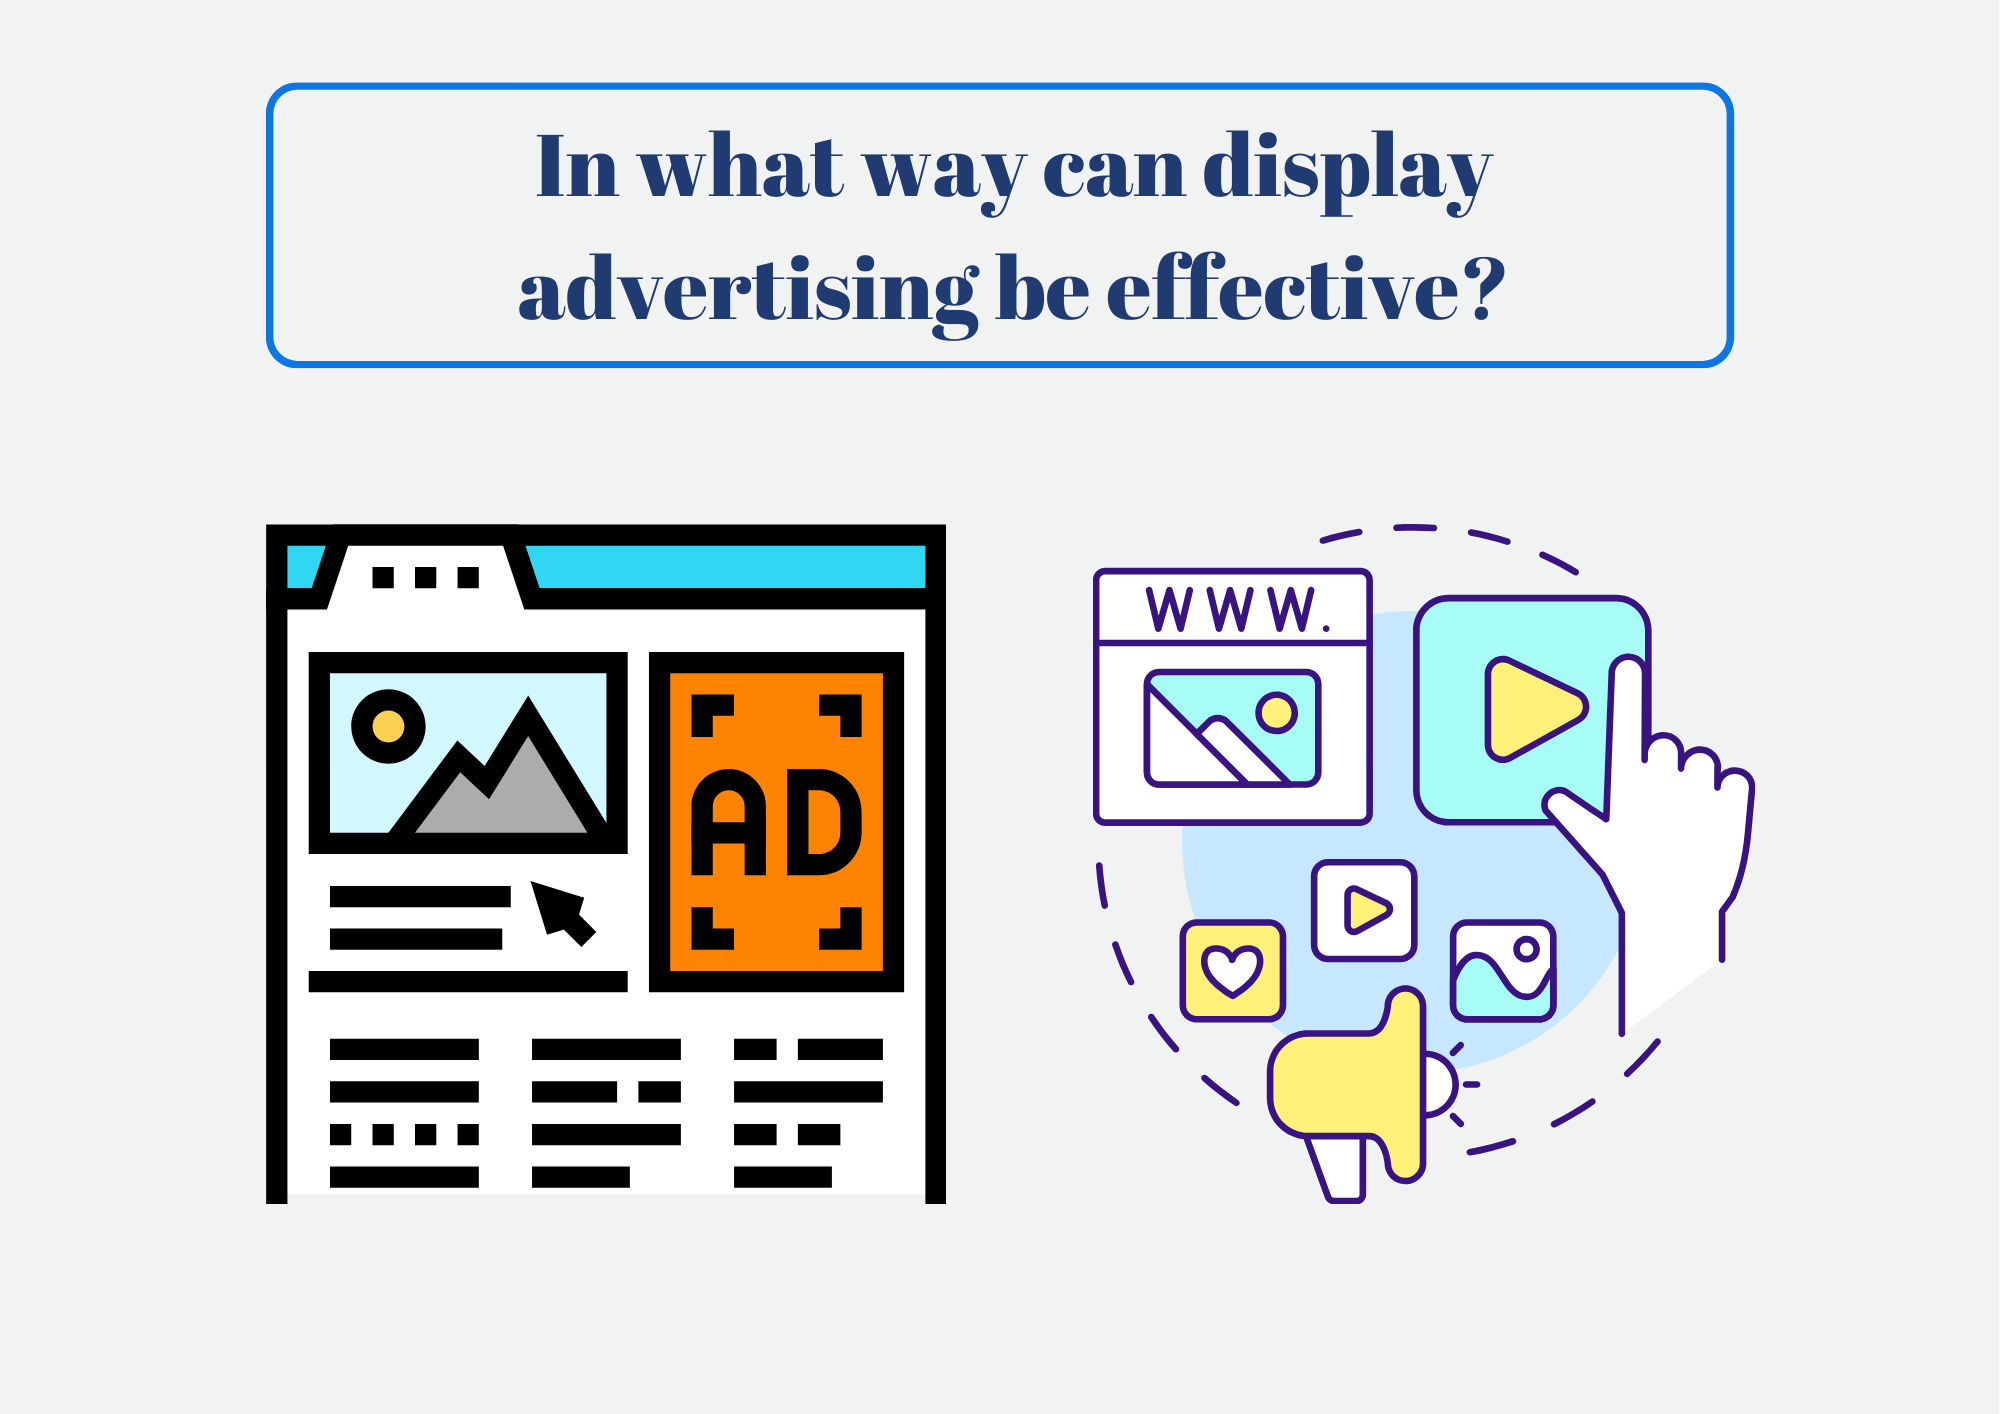 In what way can display advertising be effective